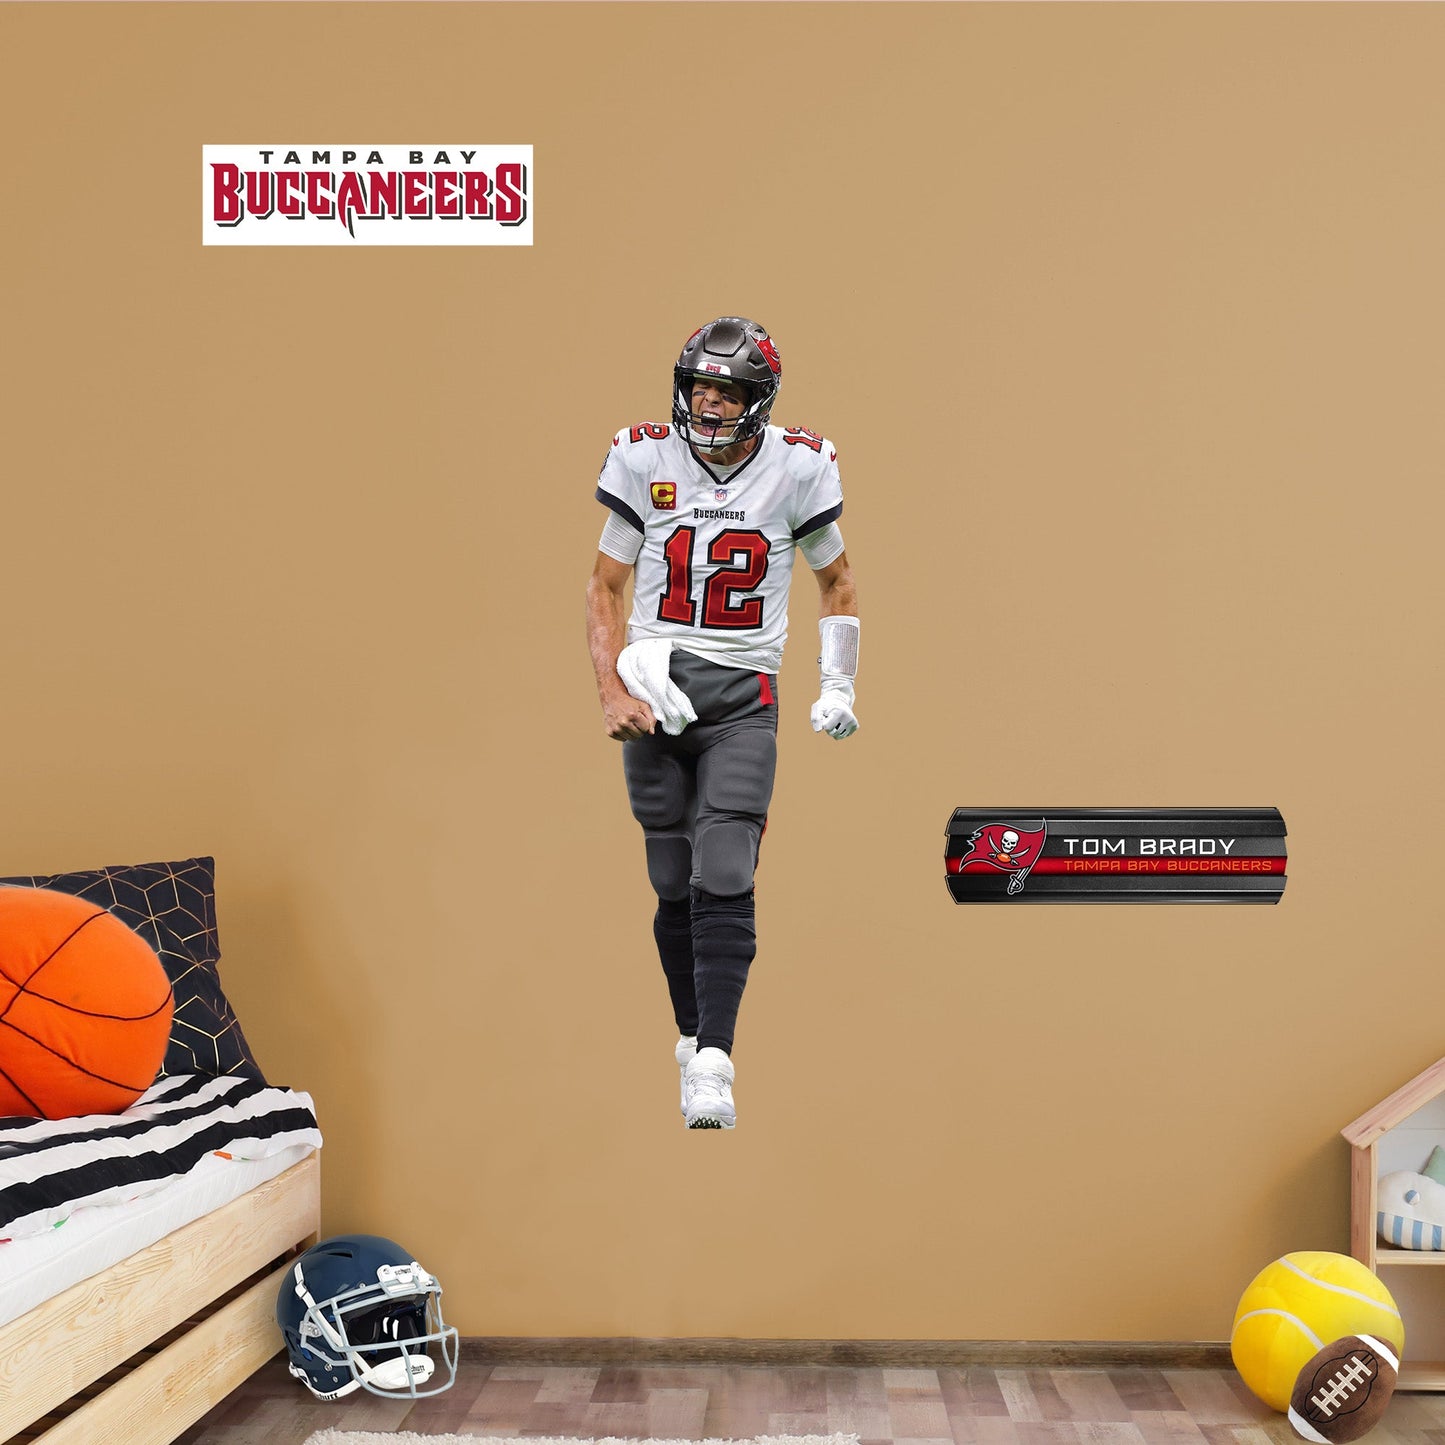 Tampa Bay Buccaneers: Tom Brady Celebration - Officially Licensed NFL Removable Adhesive Decal